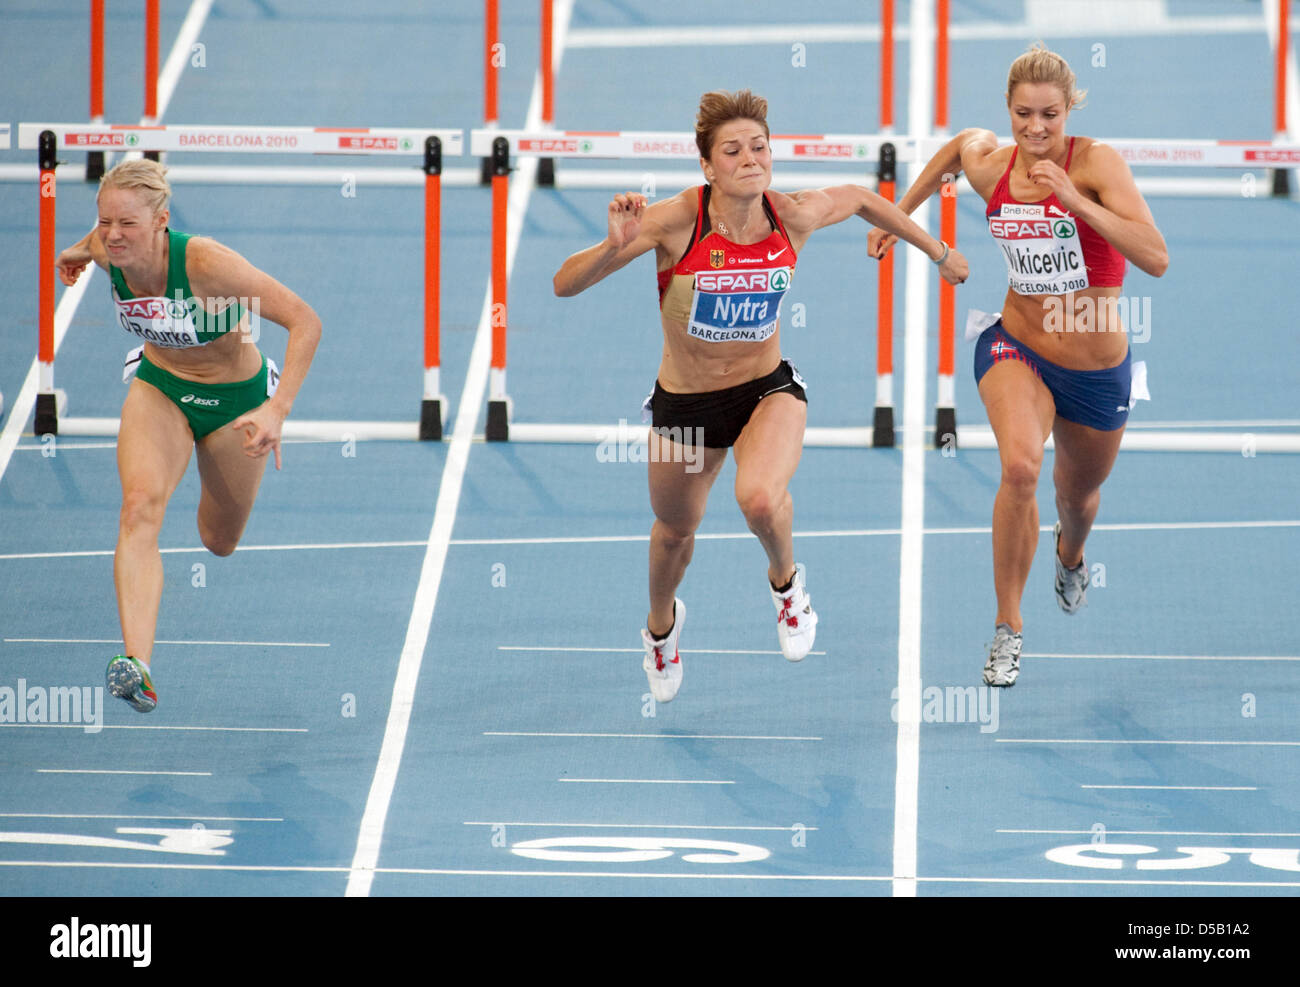 The German hurdler Carolin Nytra (M), Derval O`Rourke (L) from Ireland and Christina Vukicevic from Norway run at the European Athletics Championships at Olympic Stadium Lluis Companys in Barcelona, Spain, 31 July 2010. Photo: Bernd Thissen Stock Photo